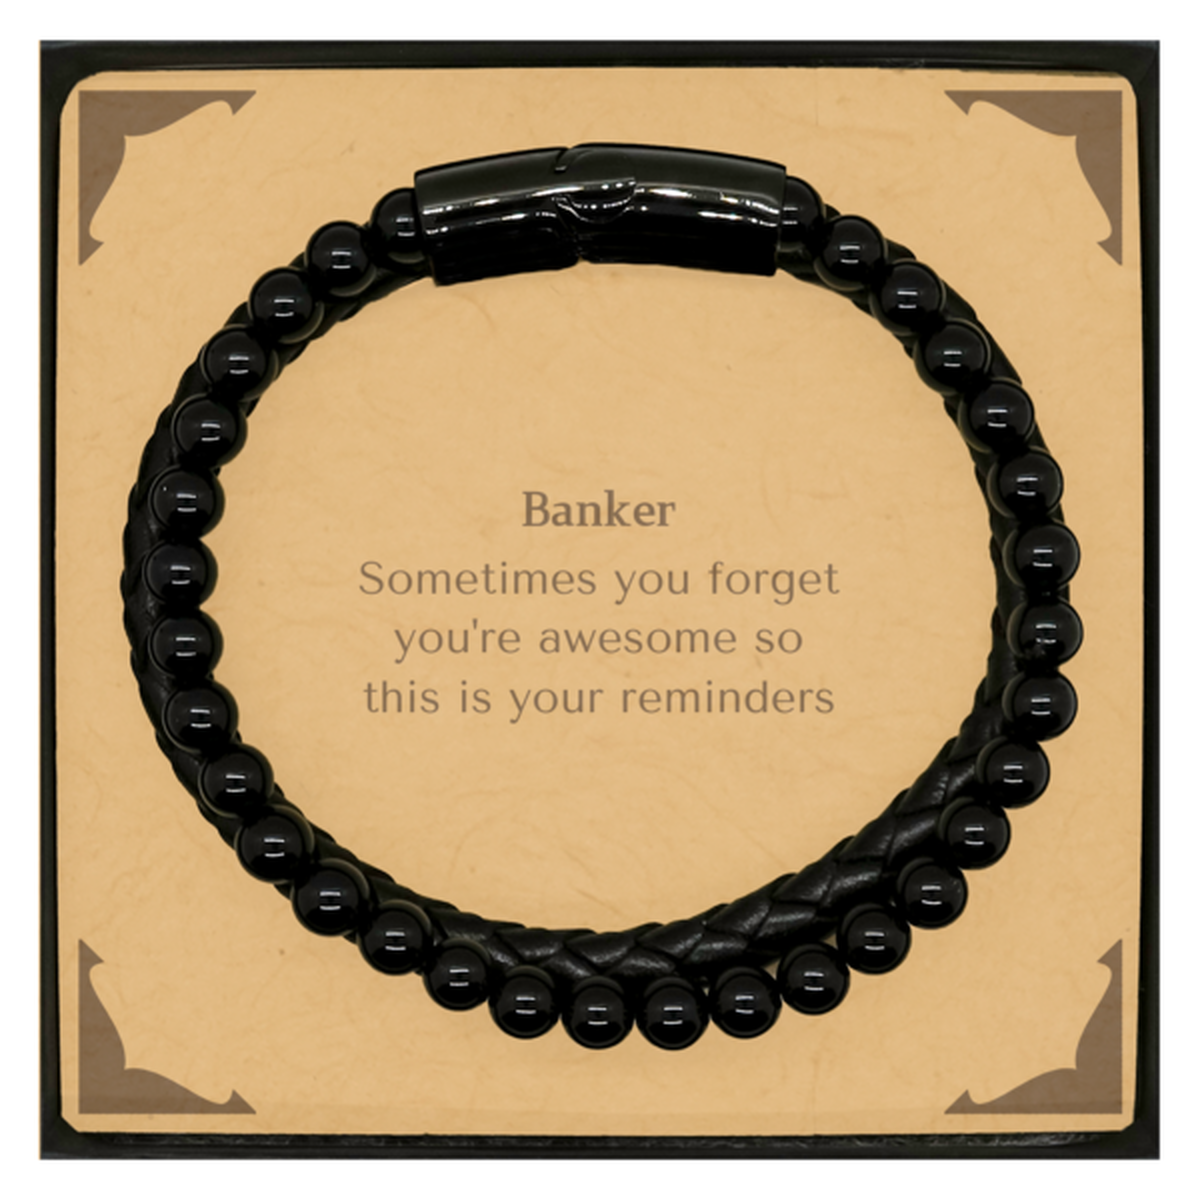 Sentimental Banker Stone Leather Bracelets, Banker Sometimes you forget you're awesome so this is your reminders, Graduation Christmas Birthday Gifts for Banker, Men, Women, Coworkers